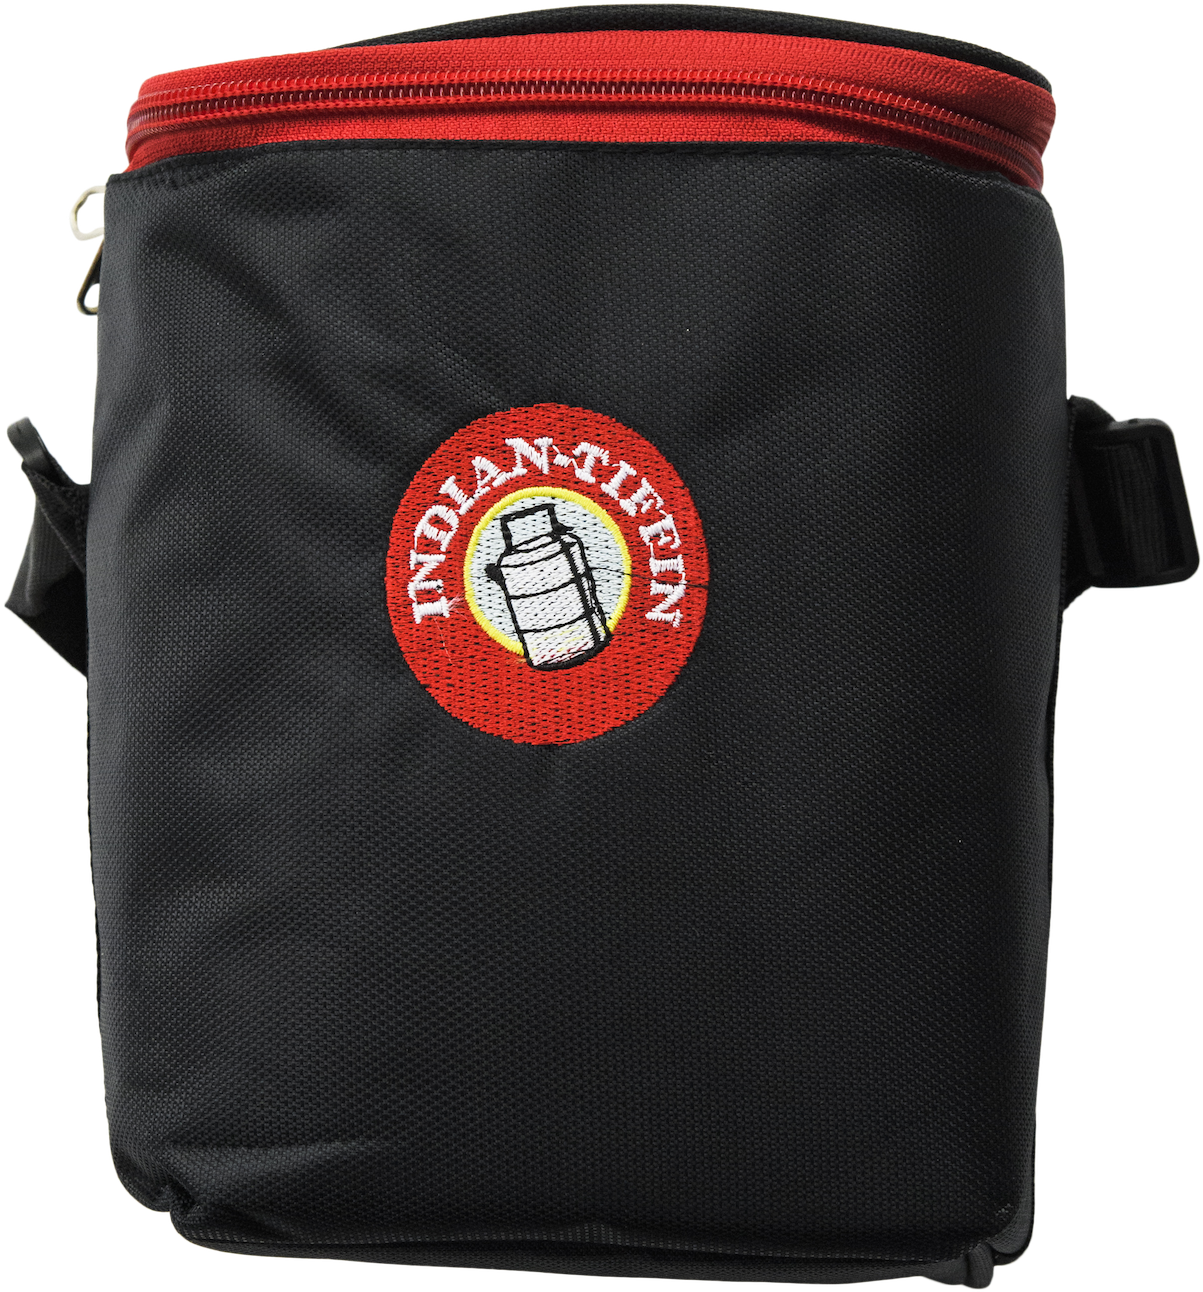 A Black And Red Bag With A Red Logo